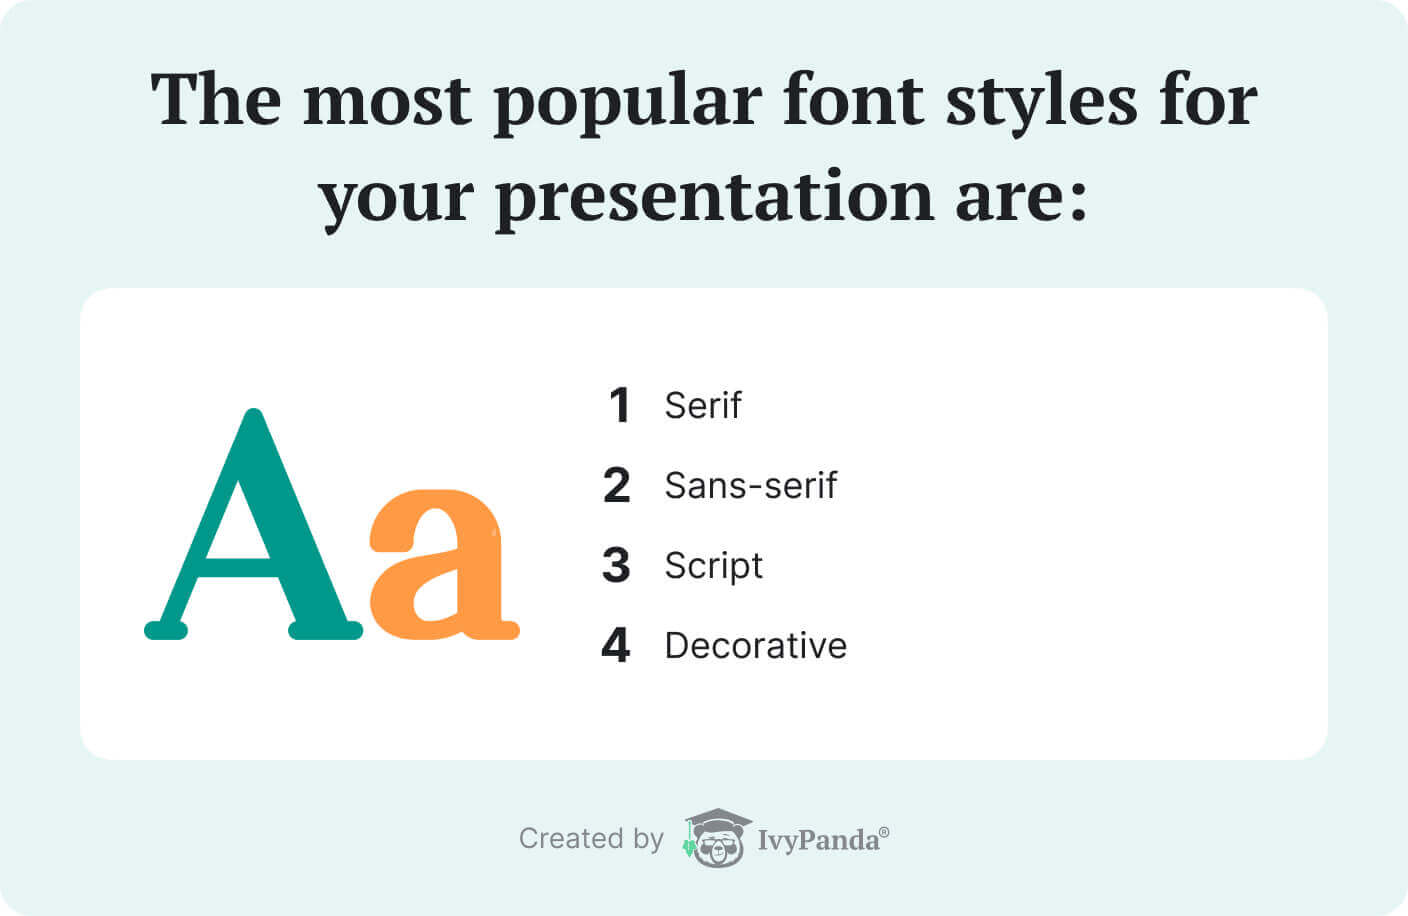 The picture enumerates the 4 main font styles for presentations.